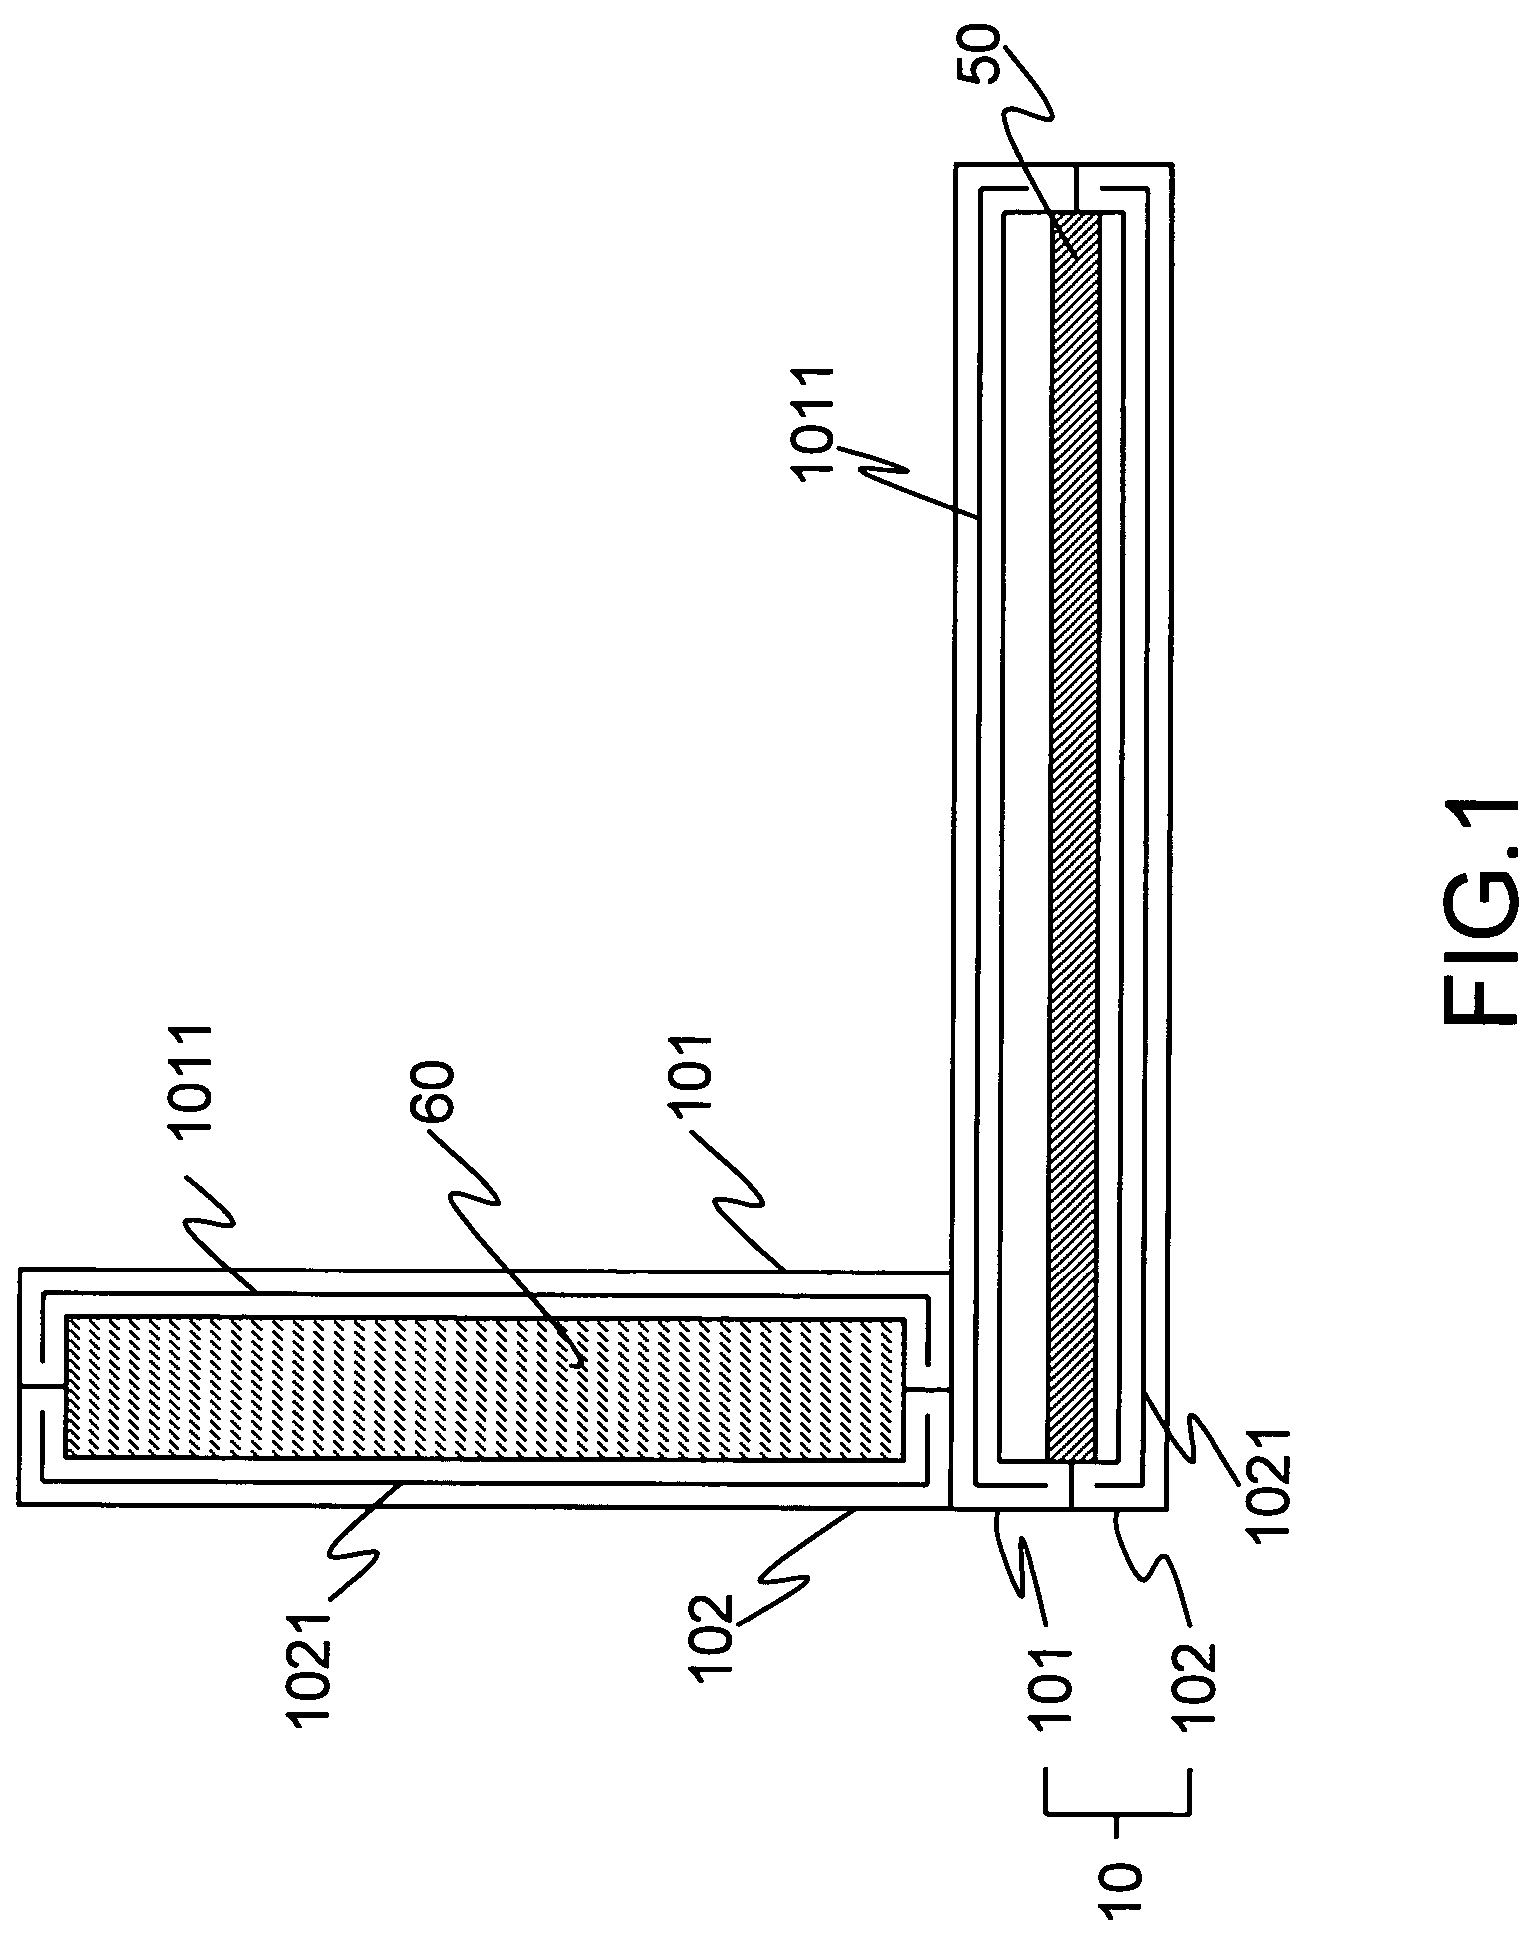 Portable information-processing device having a color changing case